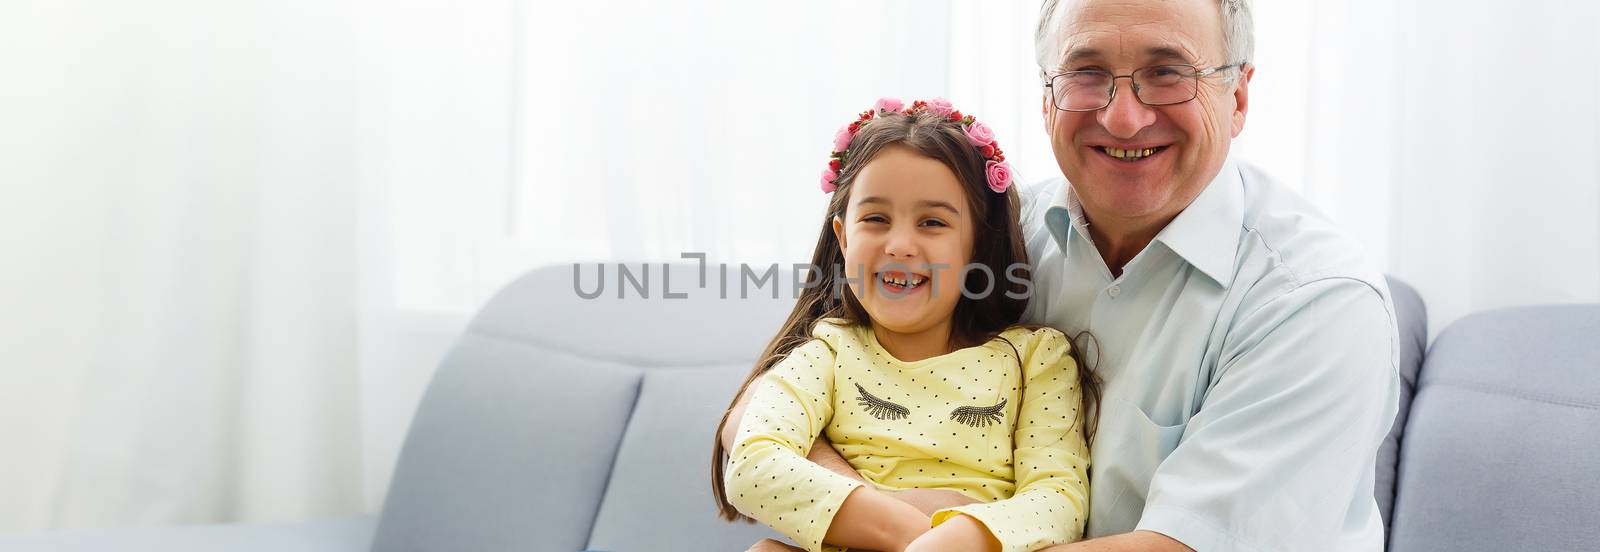 The happy girl hugs a grandfather on the sofa